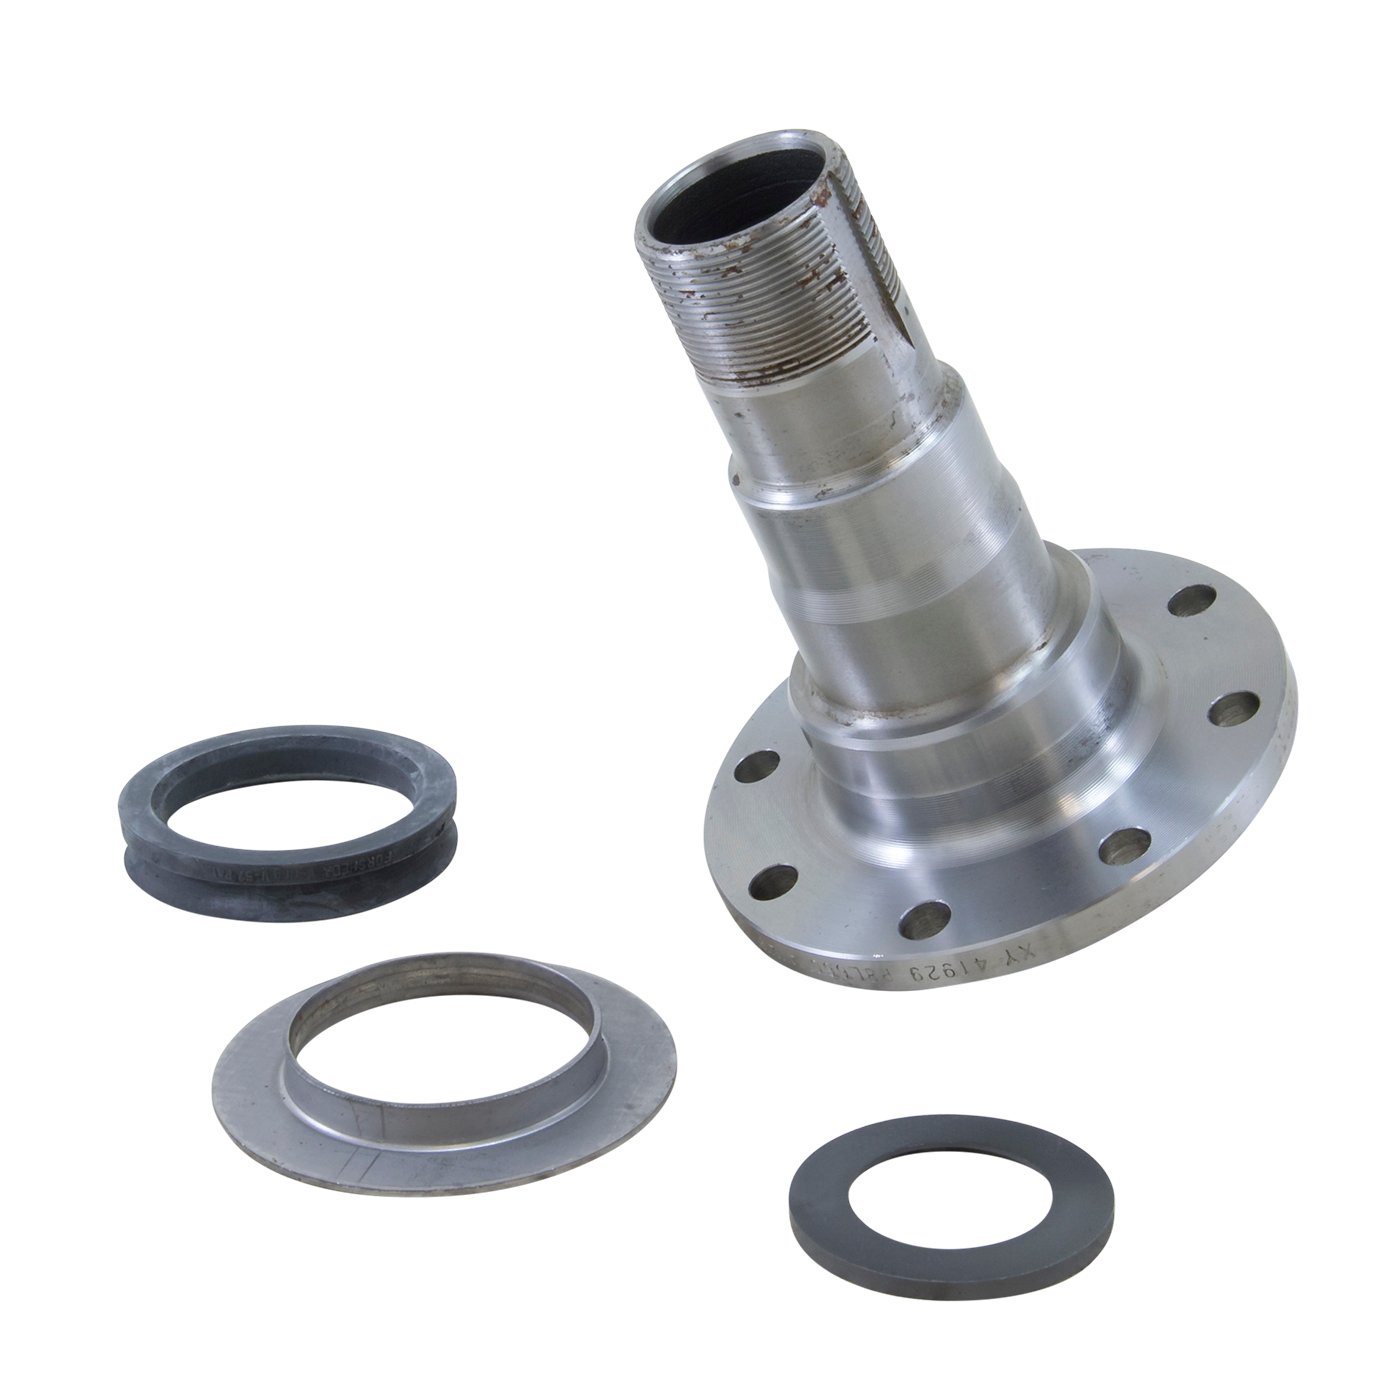 Replacement Front Spindle For Dana 44 Ifs, 8